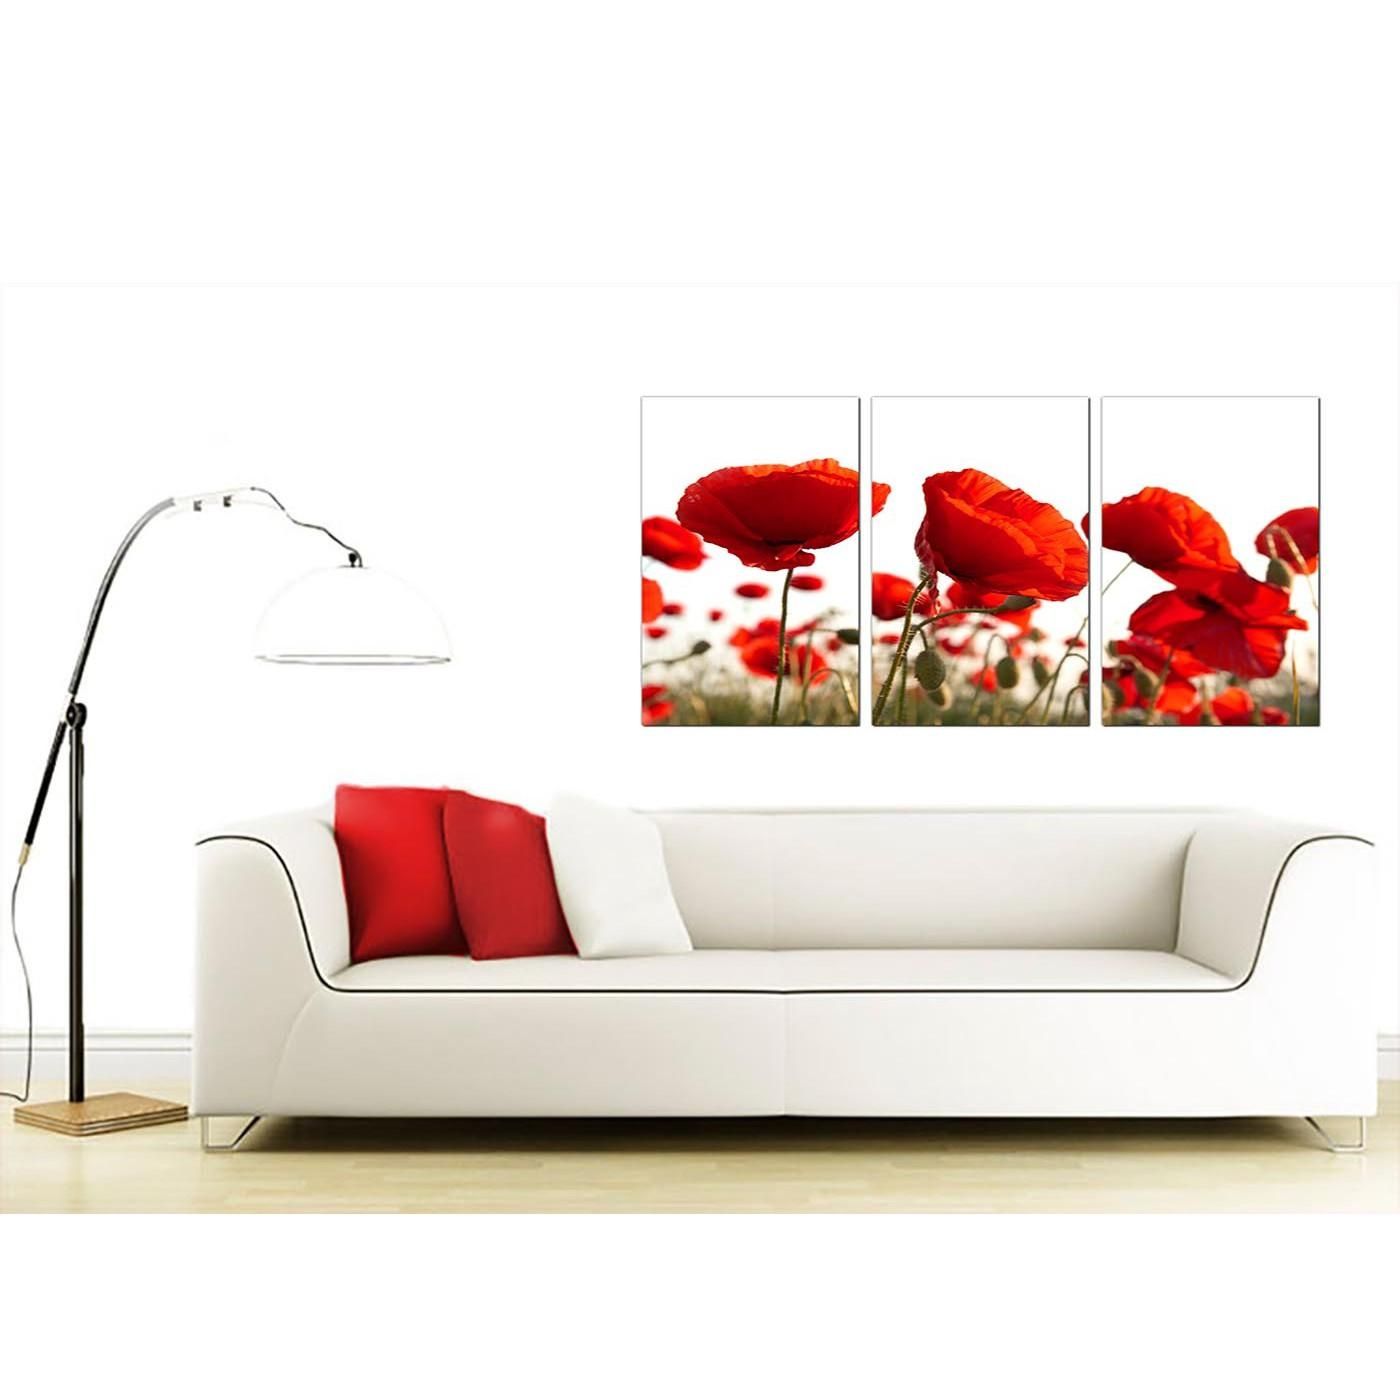 Poppy Canvas Wall Art Set Of 3 For Your Living Room With Red Poppy Canvas Wall Art (View 18 of 20)